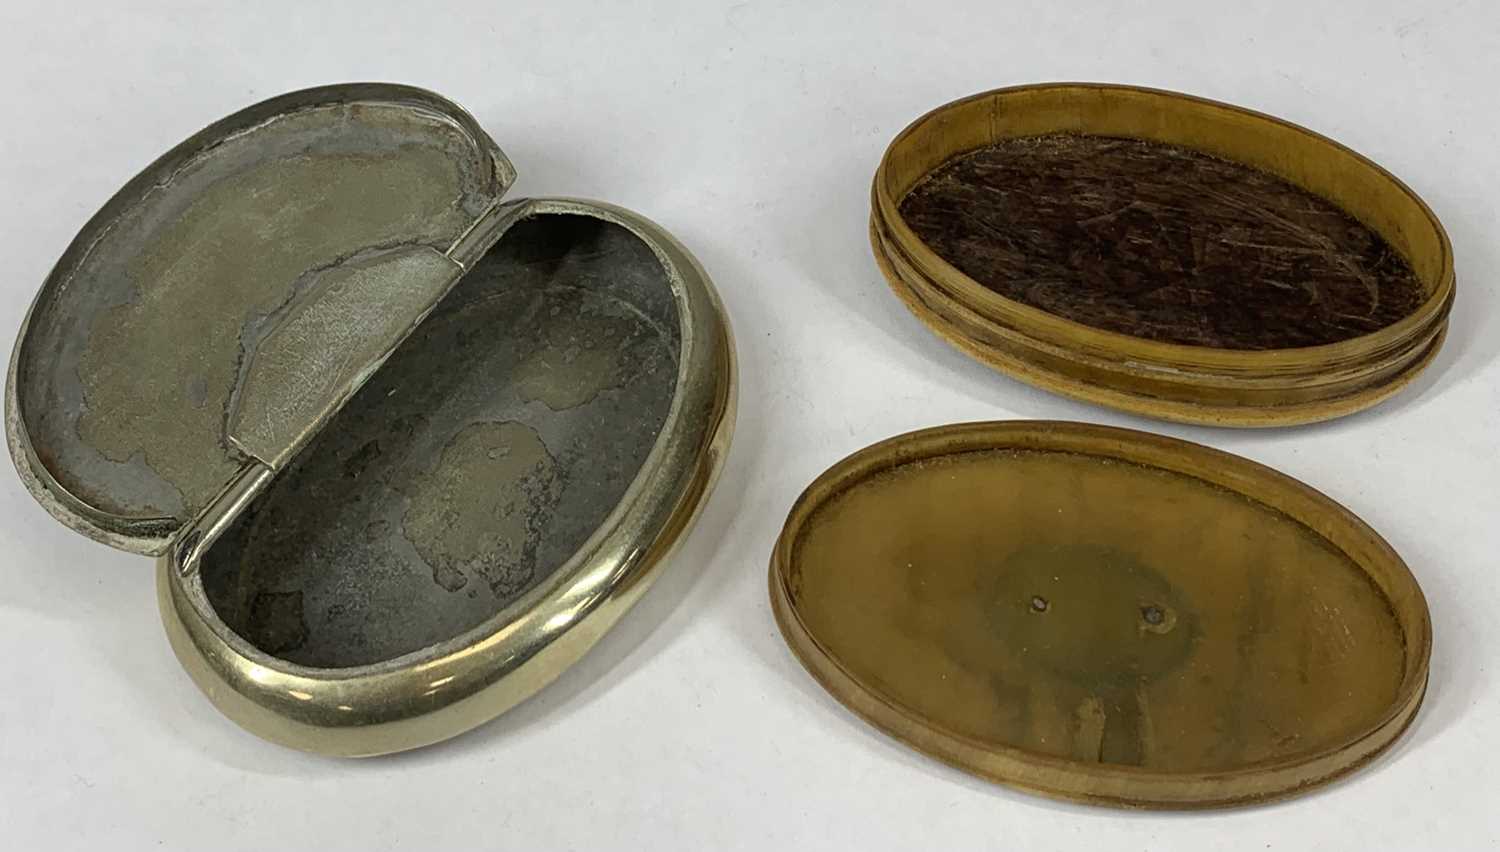 TWO ANTIQUE SNUFF BOXES - oval silver plate with hinged cover, engraved Evan Jones 1892, 9 x 6. - Image 2 of 3